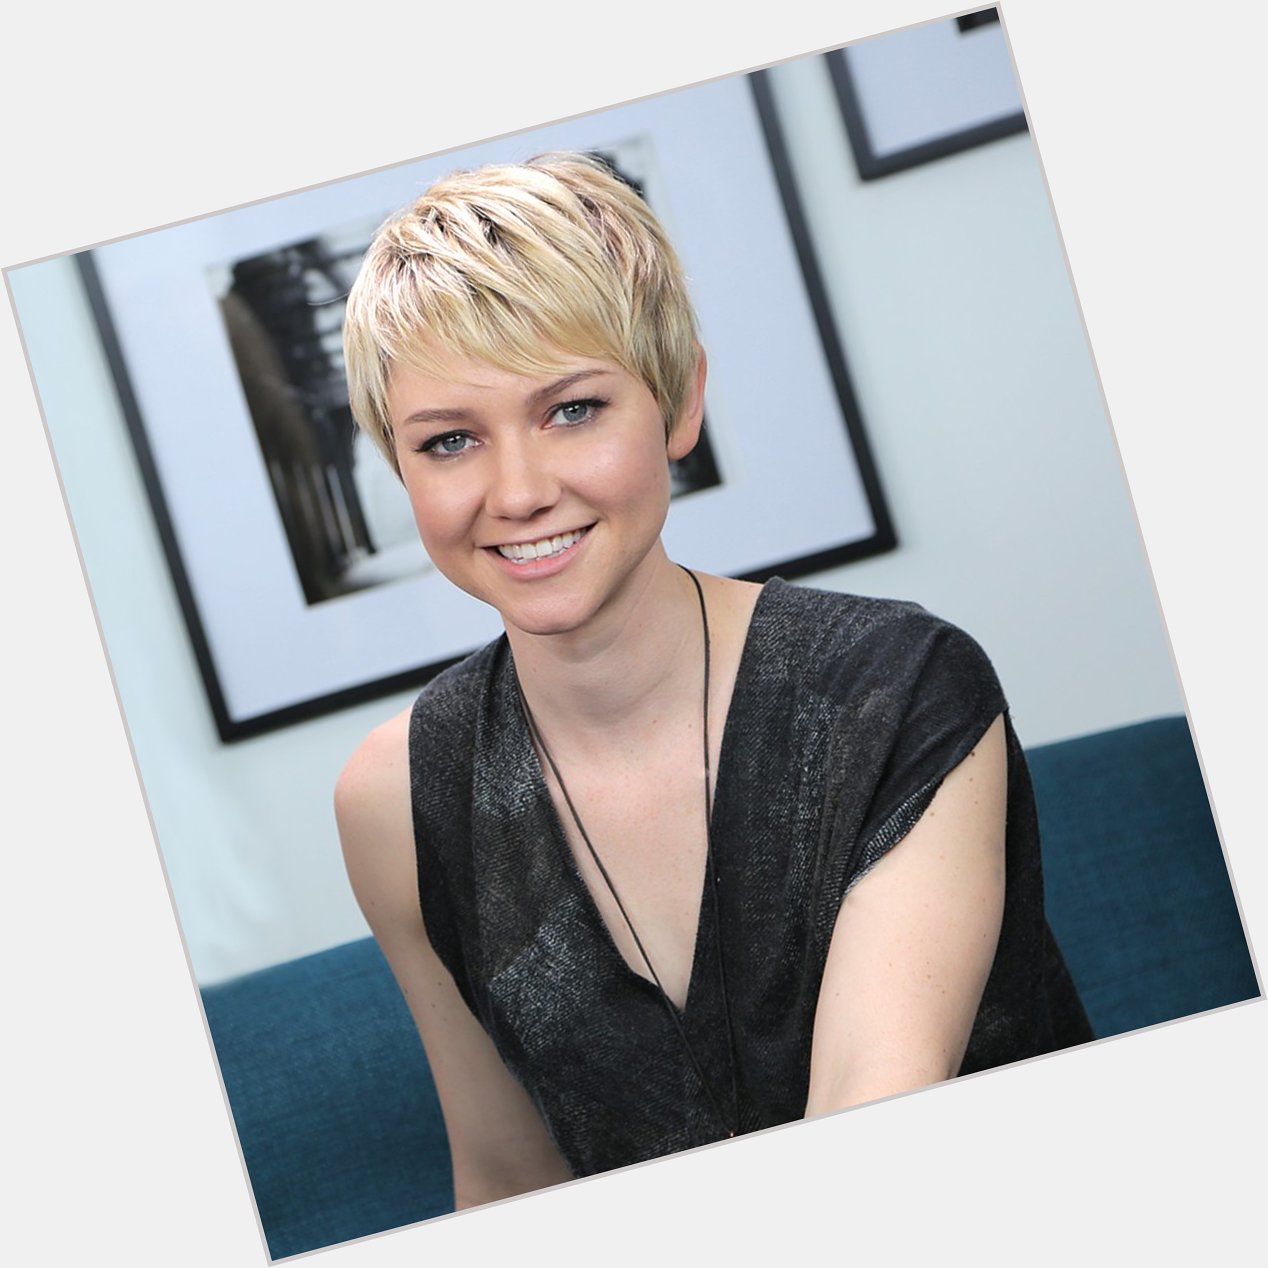 Http://fanpagepress.net/m/V/Valorie Curry New Pic 5